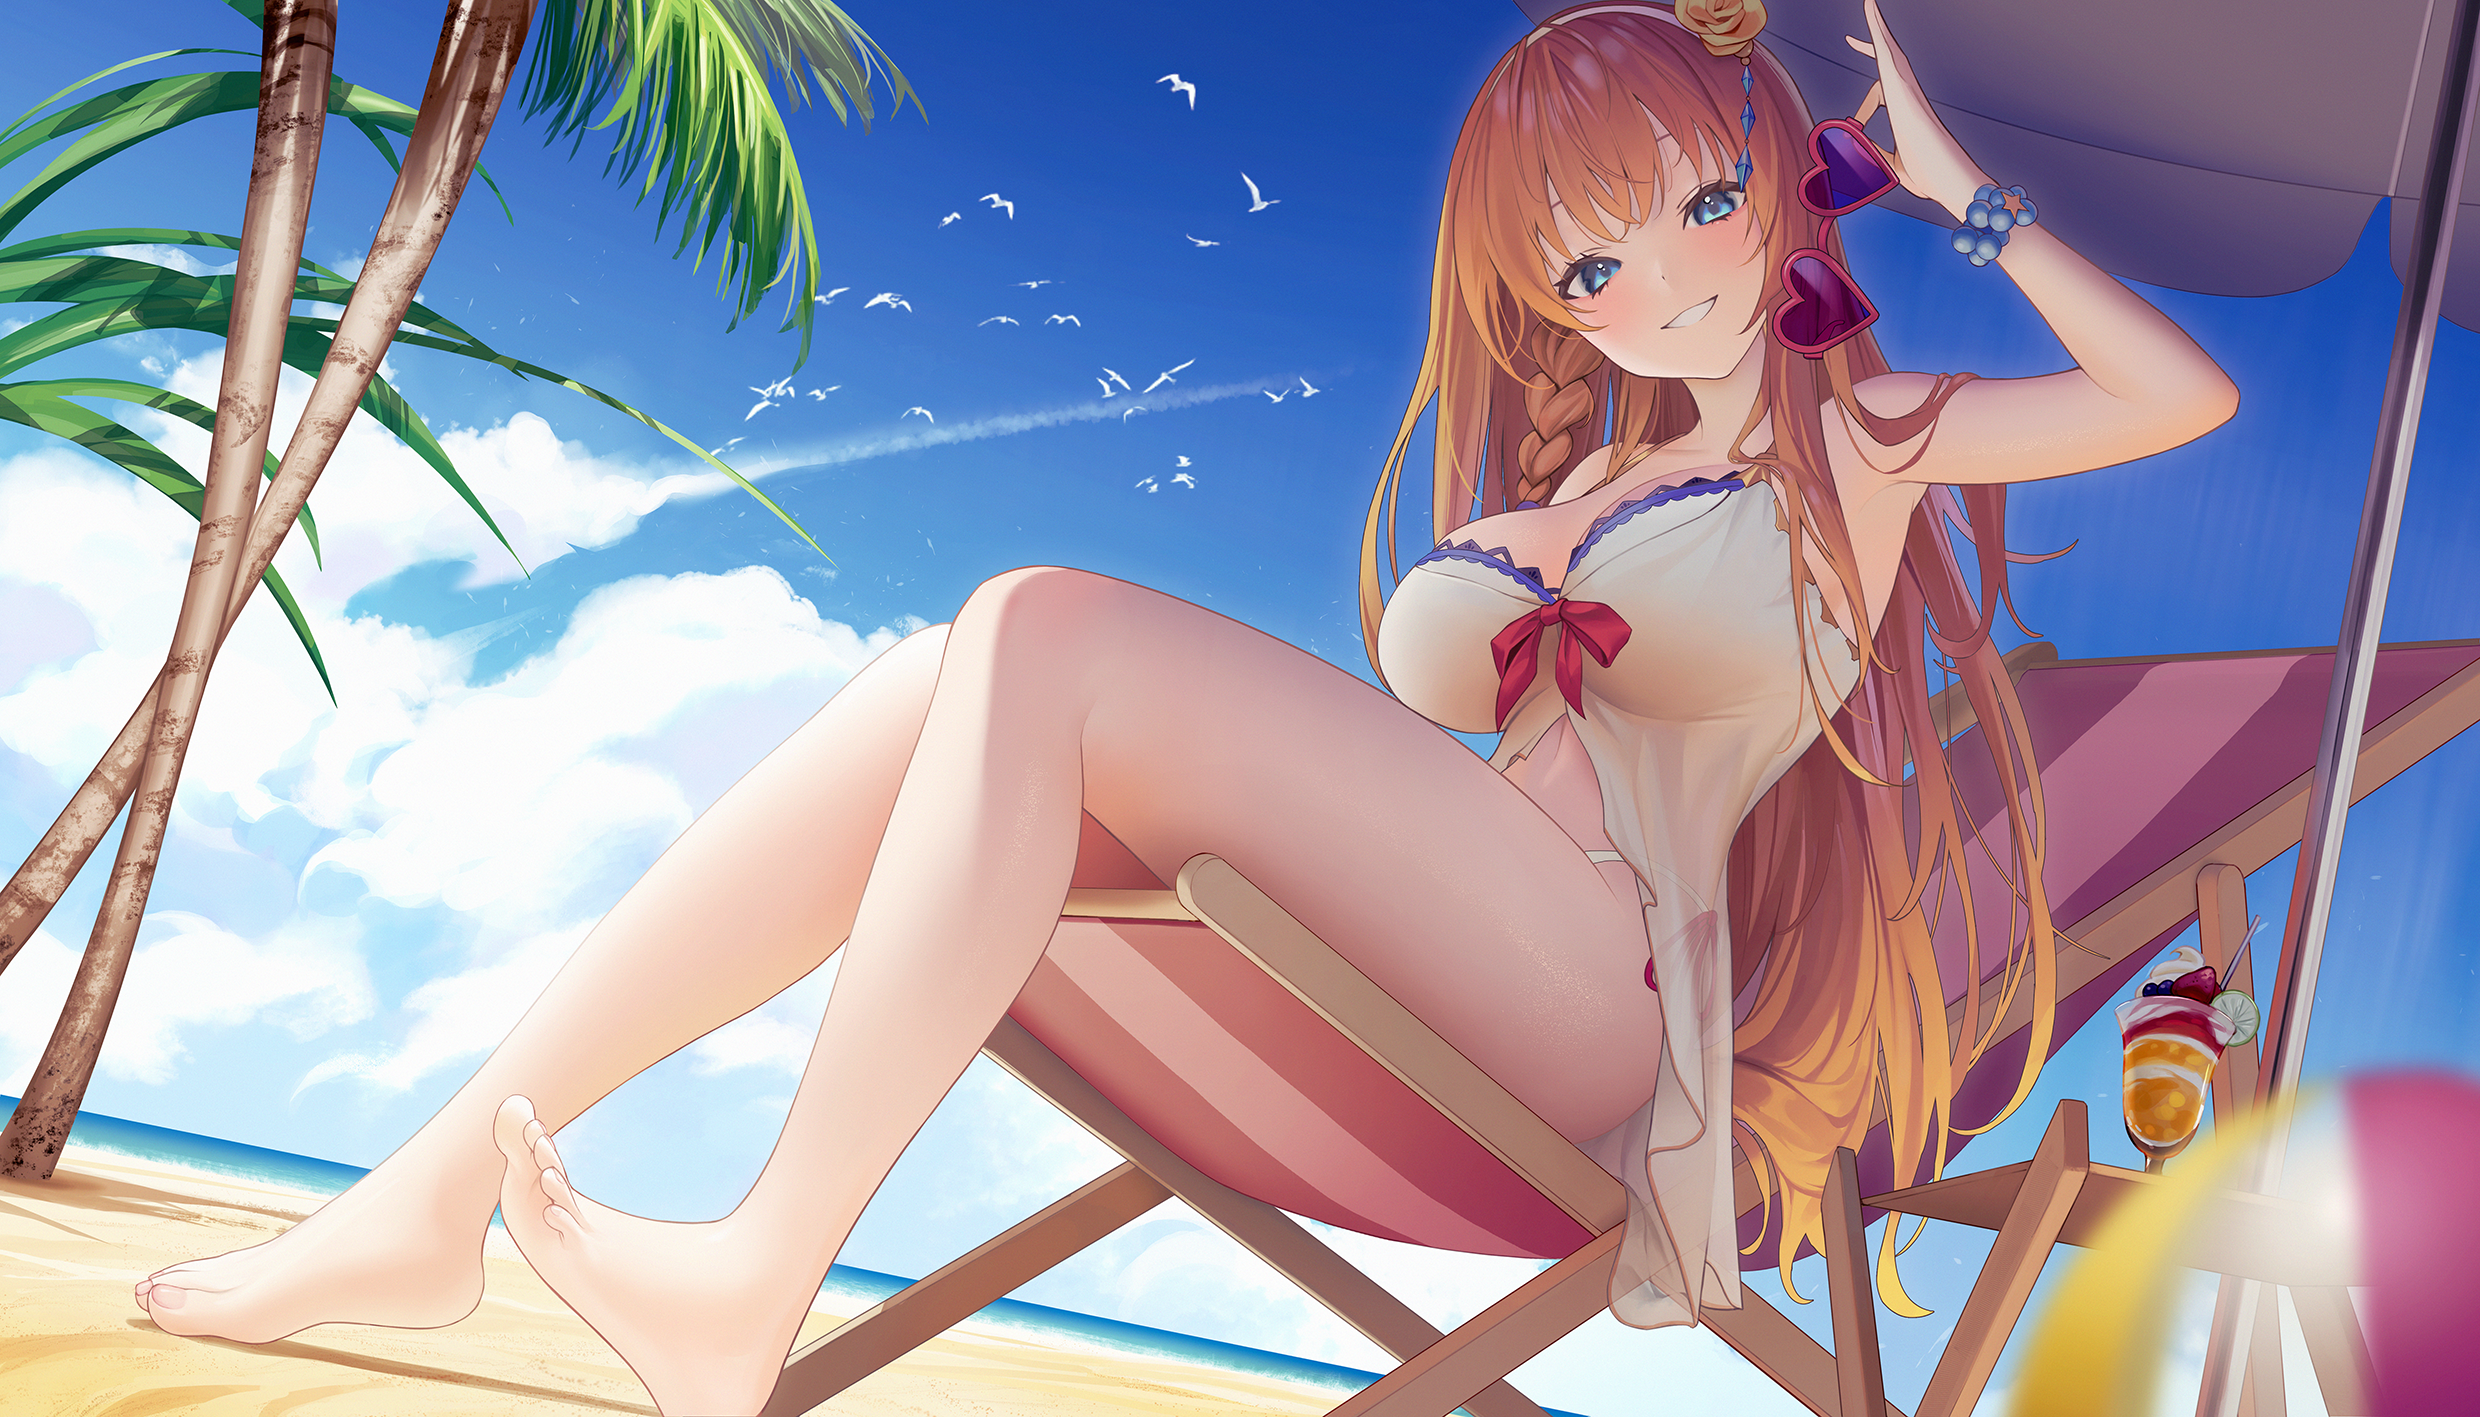 Anime 2480x1417 Princess Connect Re:Dive Pecorine (Princess Connect!) anime anime girls sitting beach big boobs long hair blonde blue eyes artwork Lezon Re low-angle looking below palm trees sunbed cocktails clouds looking at viewer heart sunglasses swimwear